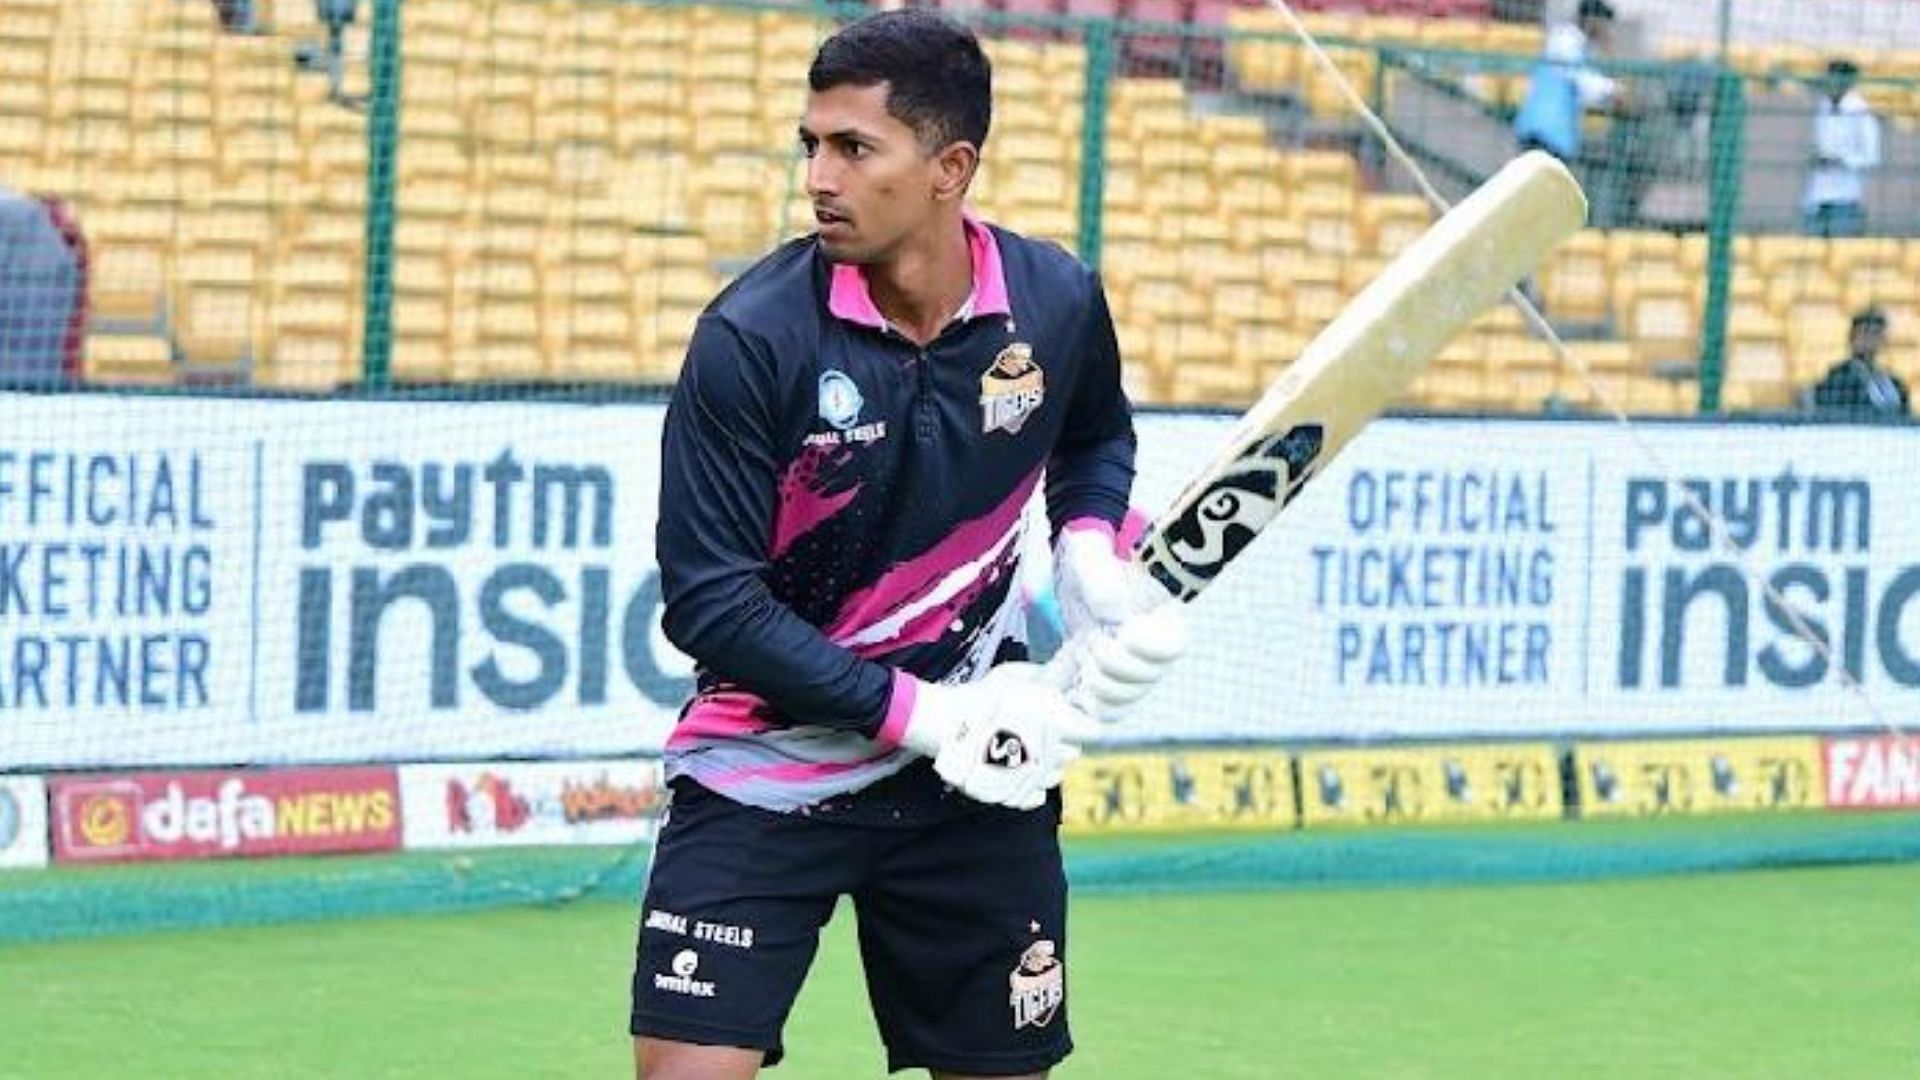 KL Shrijith in frame during a practice session for Hubli Tigers 